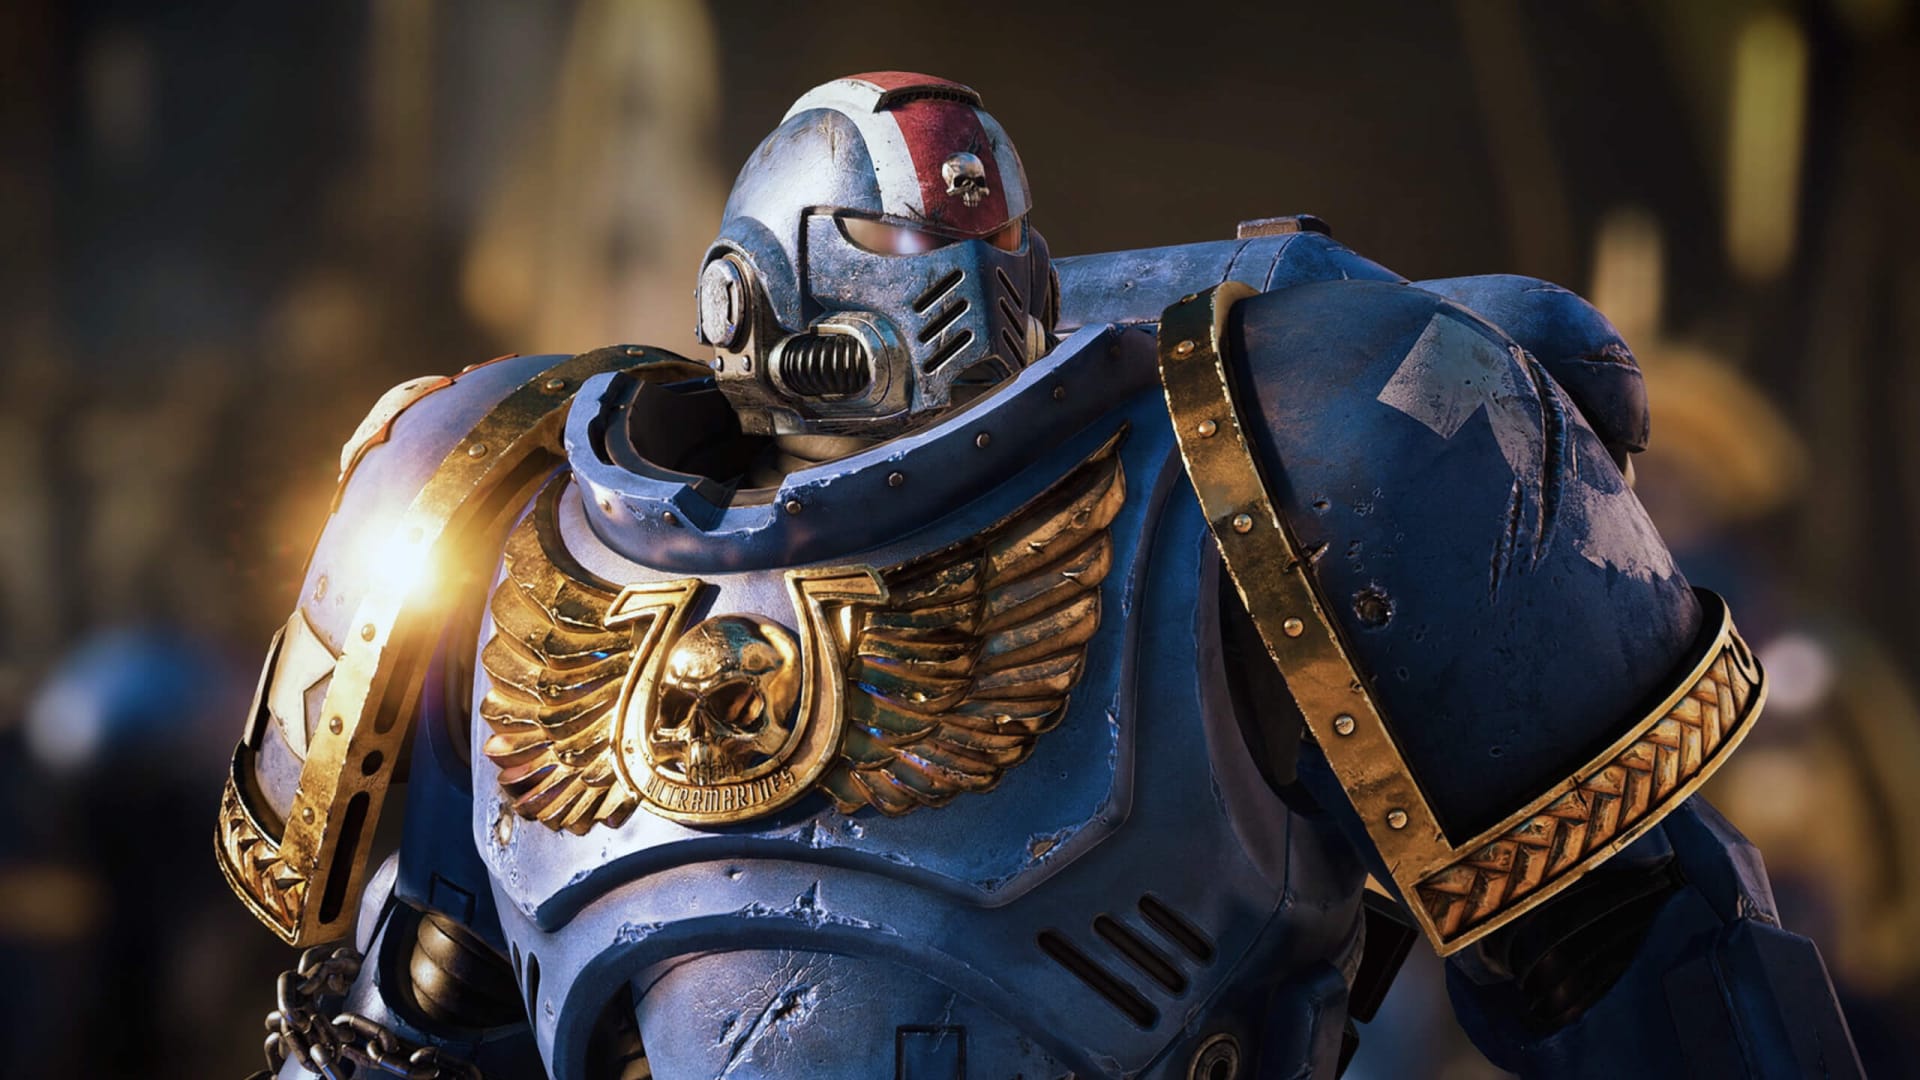 Praise the Emperor! Space Marine 2 Won’t Have Microtransactions